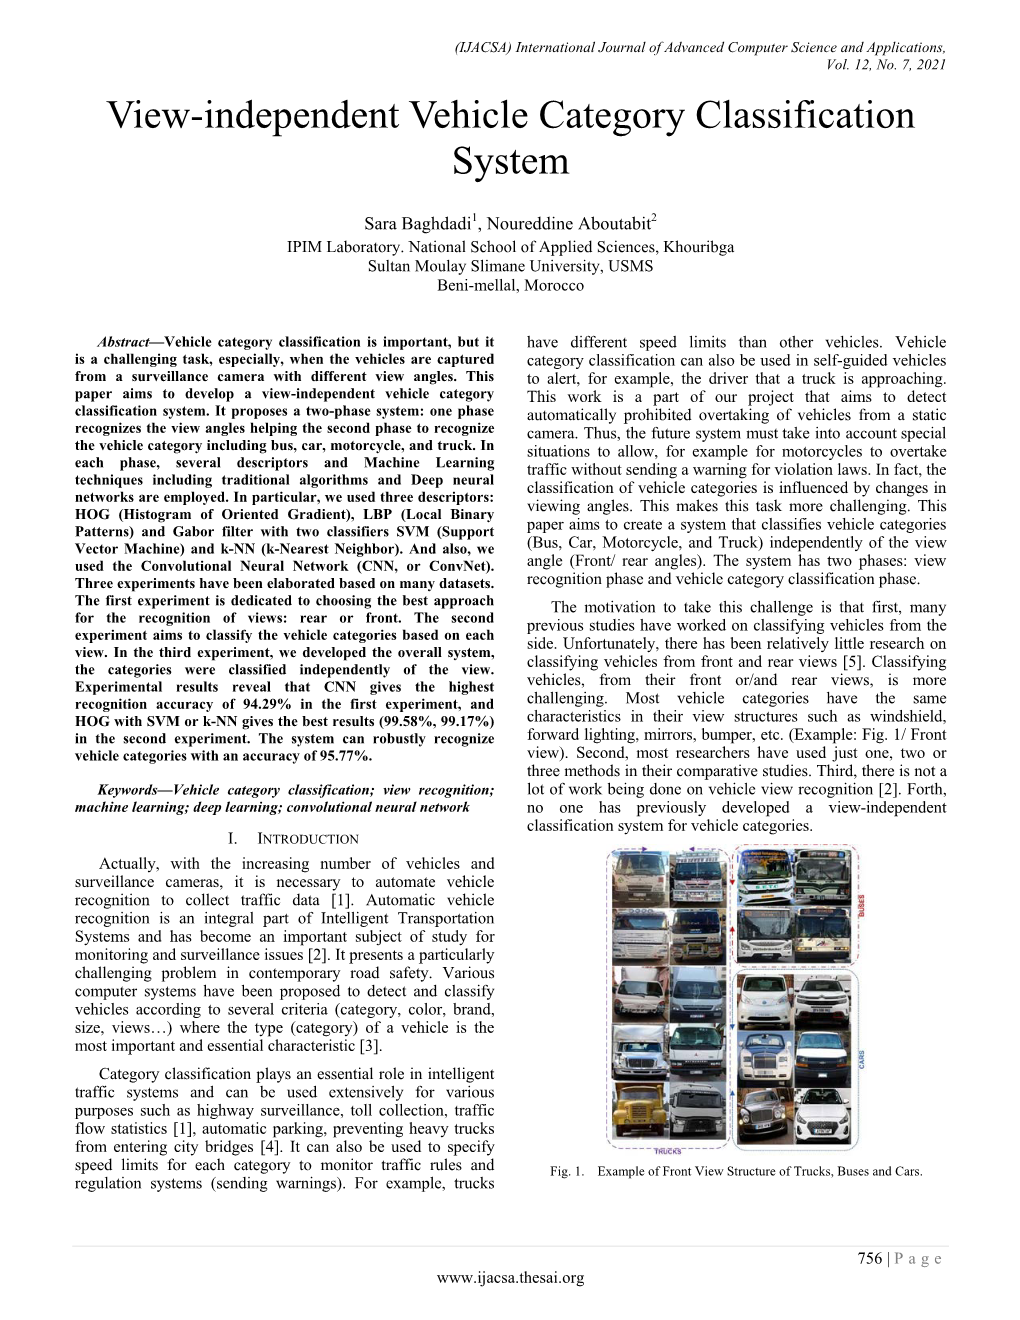 View-Independent Vehicle Category Classification System